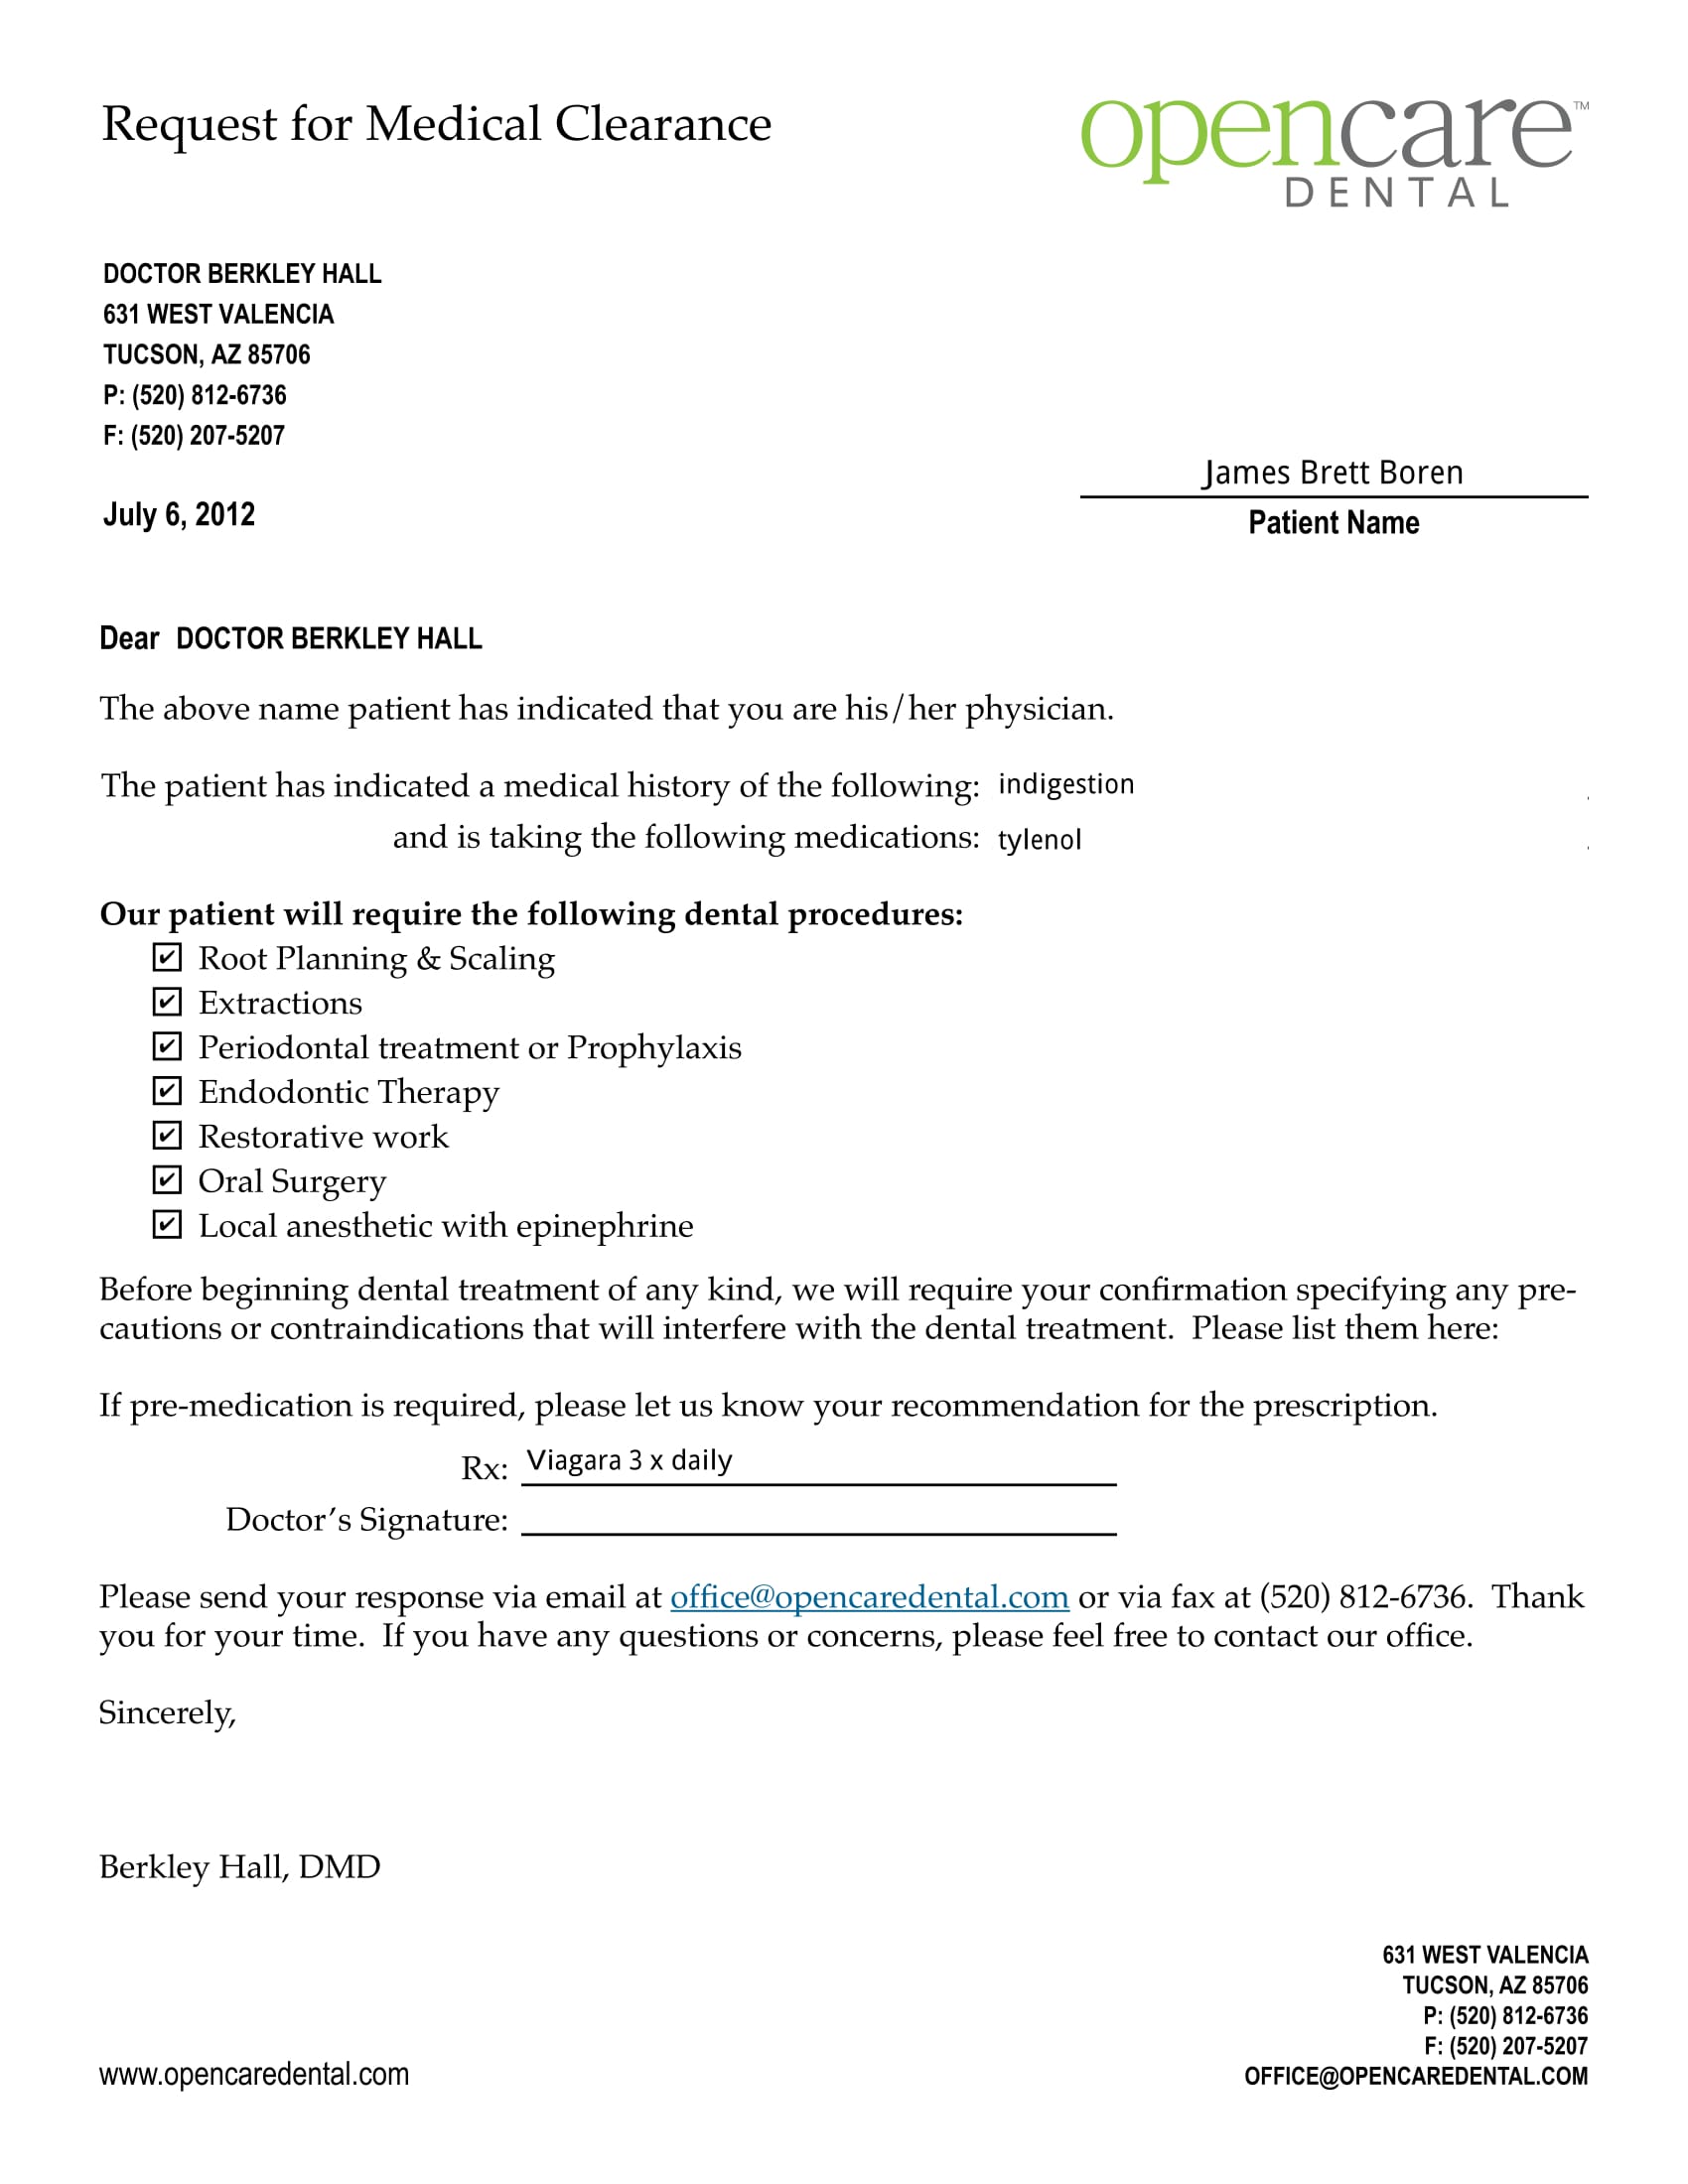 dental medical clearance request form 1